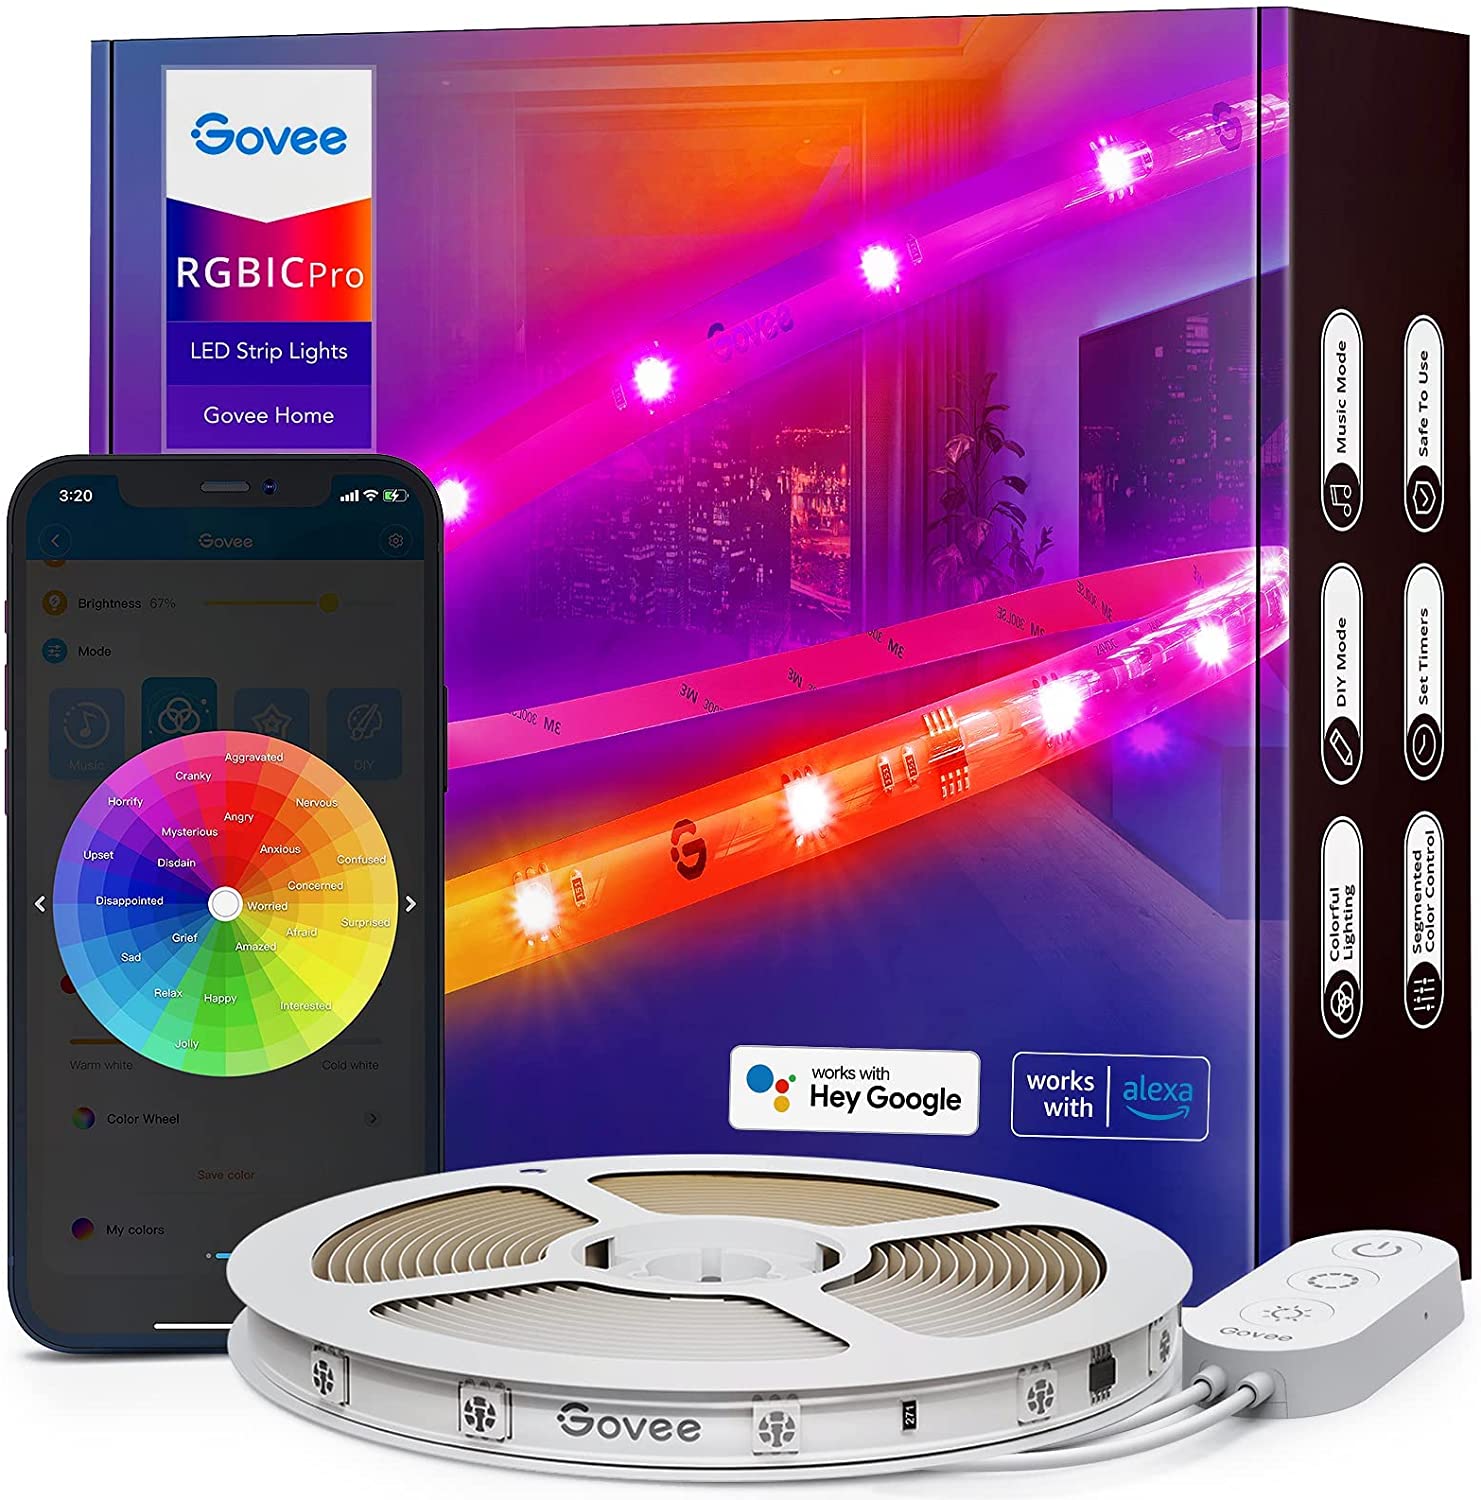 16.4ft WiFi RGBIC LED Strip Lights with Protective Coating, Voice and App Control, Segmented DIY, Music Sync -$19.99 + Free Shipping with Prime